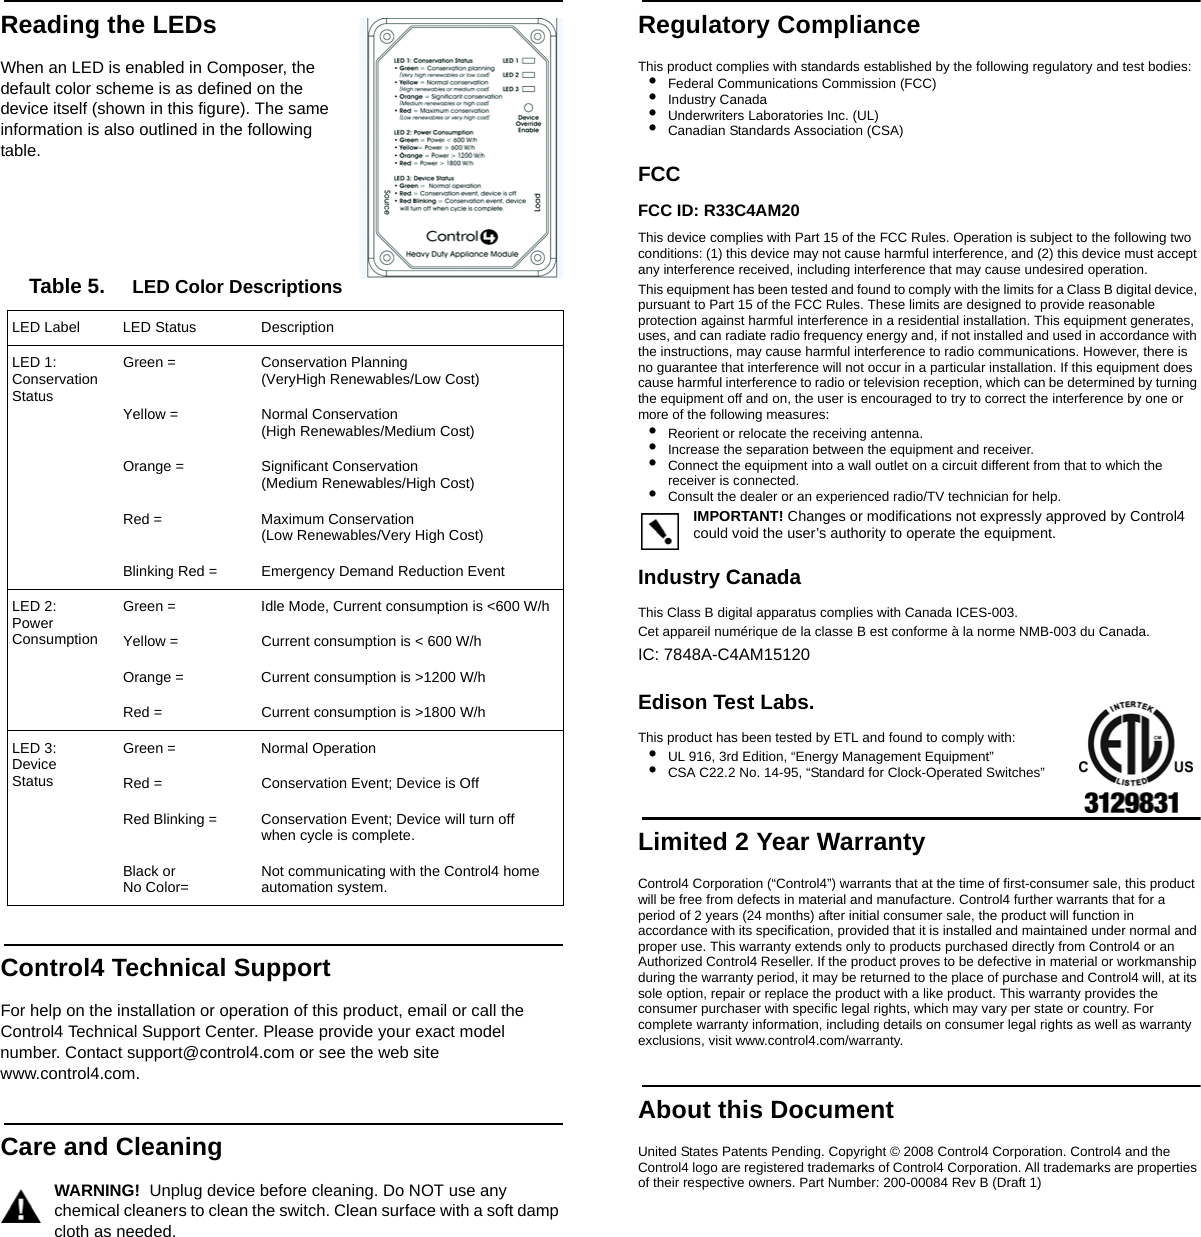                                                                                                                                                                                                                    Reading the LEDsWhen an LED is enabled in Composer, the default color scheme is as defined on the device itself (shown in this figure). The same information is also outlined in the following table.Table 5.     LED Color DescriptionsControl4 Technical SupportFor help on the installation or operation of this product, email or call the Control4 Technical Support Center. Please provide your exact model number. Contact support@control4.com or see the web site www.control4.com. Care and CleaningWARNING!  Unplug device before cleaning. Do NOT use any chemical cleaners to clean the switch. Clean surface with a soft damp cloth as needed.Regulatory ComplianceThis product complies with standards established by the following regulatory and test bodies:•Federal Communications Commission (FCC)•Industry Canada•Underwriters Laboratories Inc. (UL)•Canadian Standards Association (CSA)FCC FCC ID: R33C4AM20This device complies with Part 15 of the FCC Rules. Operation is subject to the following two conditions: (1) this device may not cause harmful interference, and (2) this device must accept any interference received, including interference that may cause undesired operation.This equipment has been tested and found to comply with the limits for a Class B digital device, pursuant to Part 15 of the FCC Rules. These limits are designed to provide reasonable protection against harmful interference in a residential installation. This equipment generates, uses, and can radiate radio frequency energy and, if not installed and used in accordance with the instructions, may cause harmful interference to radio communications. However, there is no guarantee that interference will not occur in a particular installation. If this equipment does cause harmful interference to radio or television reception, which can be determined by turning the equipment off and on, the user is encouraged to try to correct the interference by one or more of the following measures:•Reorient or relocate the receiving antenna.•Increase the separation between the equipment and receiver.•Connect the equipment into a wall outlet on a circuit different from that to which the receiver is connected.•Consult the dealer or an experienced radio/TV technician for help.IMPORTANT! Changes or modifications not expressly approved by Control4 could void the user’s authority to operate the equipment.Industry Canada This Class B digital apparatus complies with Canada ICES-003.Cet appareil numérique de la classe B est conforme à la norme NMB-003 du Canada.IC: 7848A-C4AM15120Edison Test Labs.This product has been tested by ETL and found to comply with:•UL 916, 3rd Edition, “Energy Management Equipment”•CSA C22.2 No. 14-95, “Standard for Clock-Operated Switches”Limited 2 Year WarrantyControl4 Corporation (“Control4”) warrants that at the time of first-consumer sale, this product will be free from defects in material and manufacture. Control4 further warrants that for a period of 2 years (24 months) after initial consumer sale, the product will function in accordance with its specification, provided that it is installed and maintained under normal and proper use. This warranty extends only to products purchased directly from Control4 or an Authorized Control4 Reseller. If the product proves to be defective in material or workmanship during the warranty period, it may be returned to the place of purchase and Control4 will, at its sole option, repair or replace the product with a like product. This warranty provides the consumer purchaser with specific legal rights, which may vary per state or country. For complete warranty information, including details on consumer legal rights as well as warranty exclusions, visit www.control4.com/warranty.About this DocumentUnited States Patents Pending. Copyright © 2008 Control4 Corporation. Control4 and the Control4 logo are registered trademarks of Control4 Corporation. All trademarks are properties of their respective owners. Part Number: 200-00084 Rev B (Draft 1)LED Label LED Status Description LED 1:Conservation StatusGreen = Conservation Planning (VeryHigh Renewables/Low Cost)Yellow = Normal Conservation (High Renewables/Medium Cost)Orange = Significant Conservation(Medium Renewables/High Cost)Red = Maximum Conservation (Low Renewables/Very High Cost)Blinking Red = Emergency Demand Reduction EventLED 2:PowerConsumptionGreen = Idle Mode, Current consumption is &lt;600 W/hYellow = Current consumption is &lt; 600 W/hOrange =  Current consumption is &gt;1200 W/hRed = Current consumption is &gt;1800 W/hLED 3:Device StatusGreen = Normal OperationRed = Conservation Event; Device is OffRed Blinking = Conservation Event; Device will turn off when cycle is complete.Black or No Color= Not communicating with the Control4 home automation system.